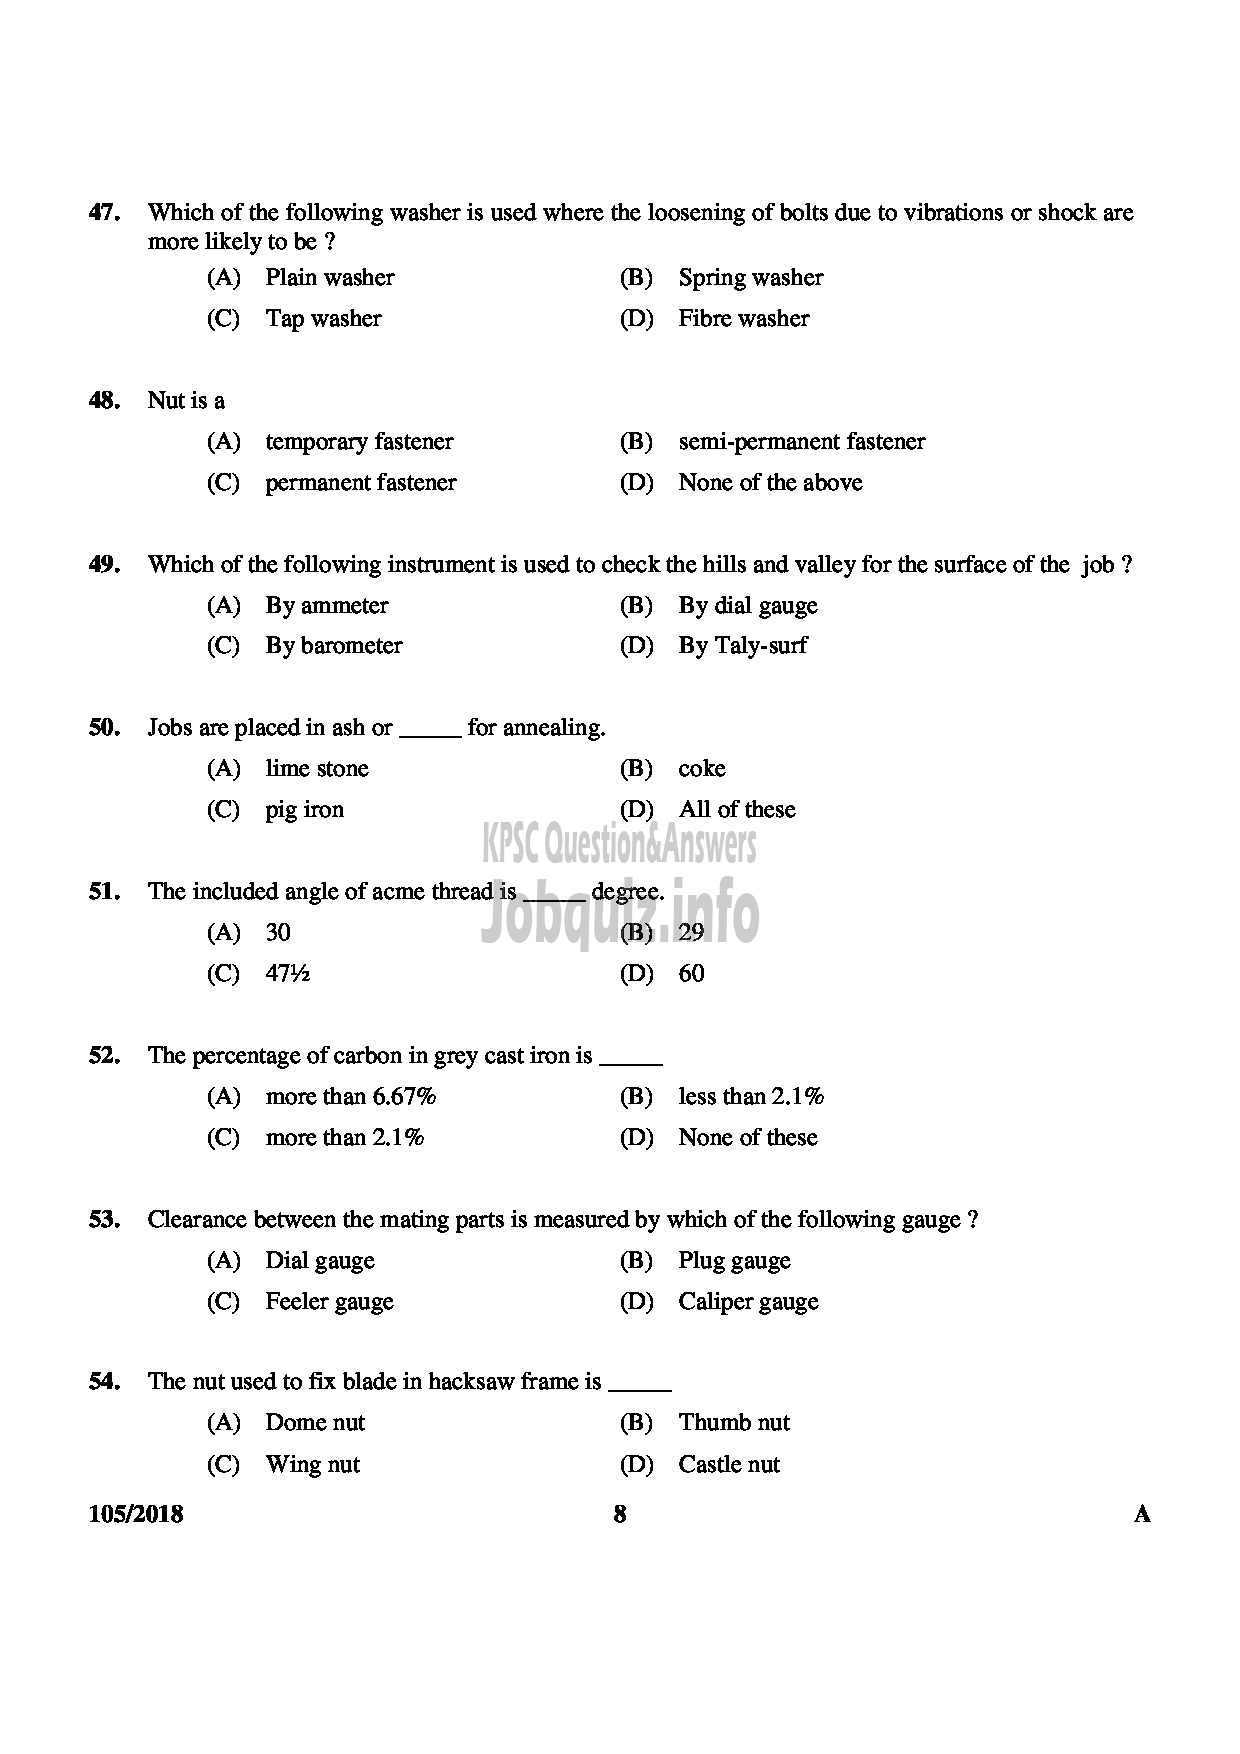 Kerala PSC Question Paper - JUNIOR INSTRUCTOR MACHINIST INDUSTRIAL TRAINING English -8